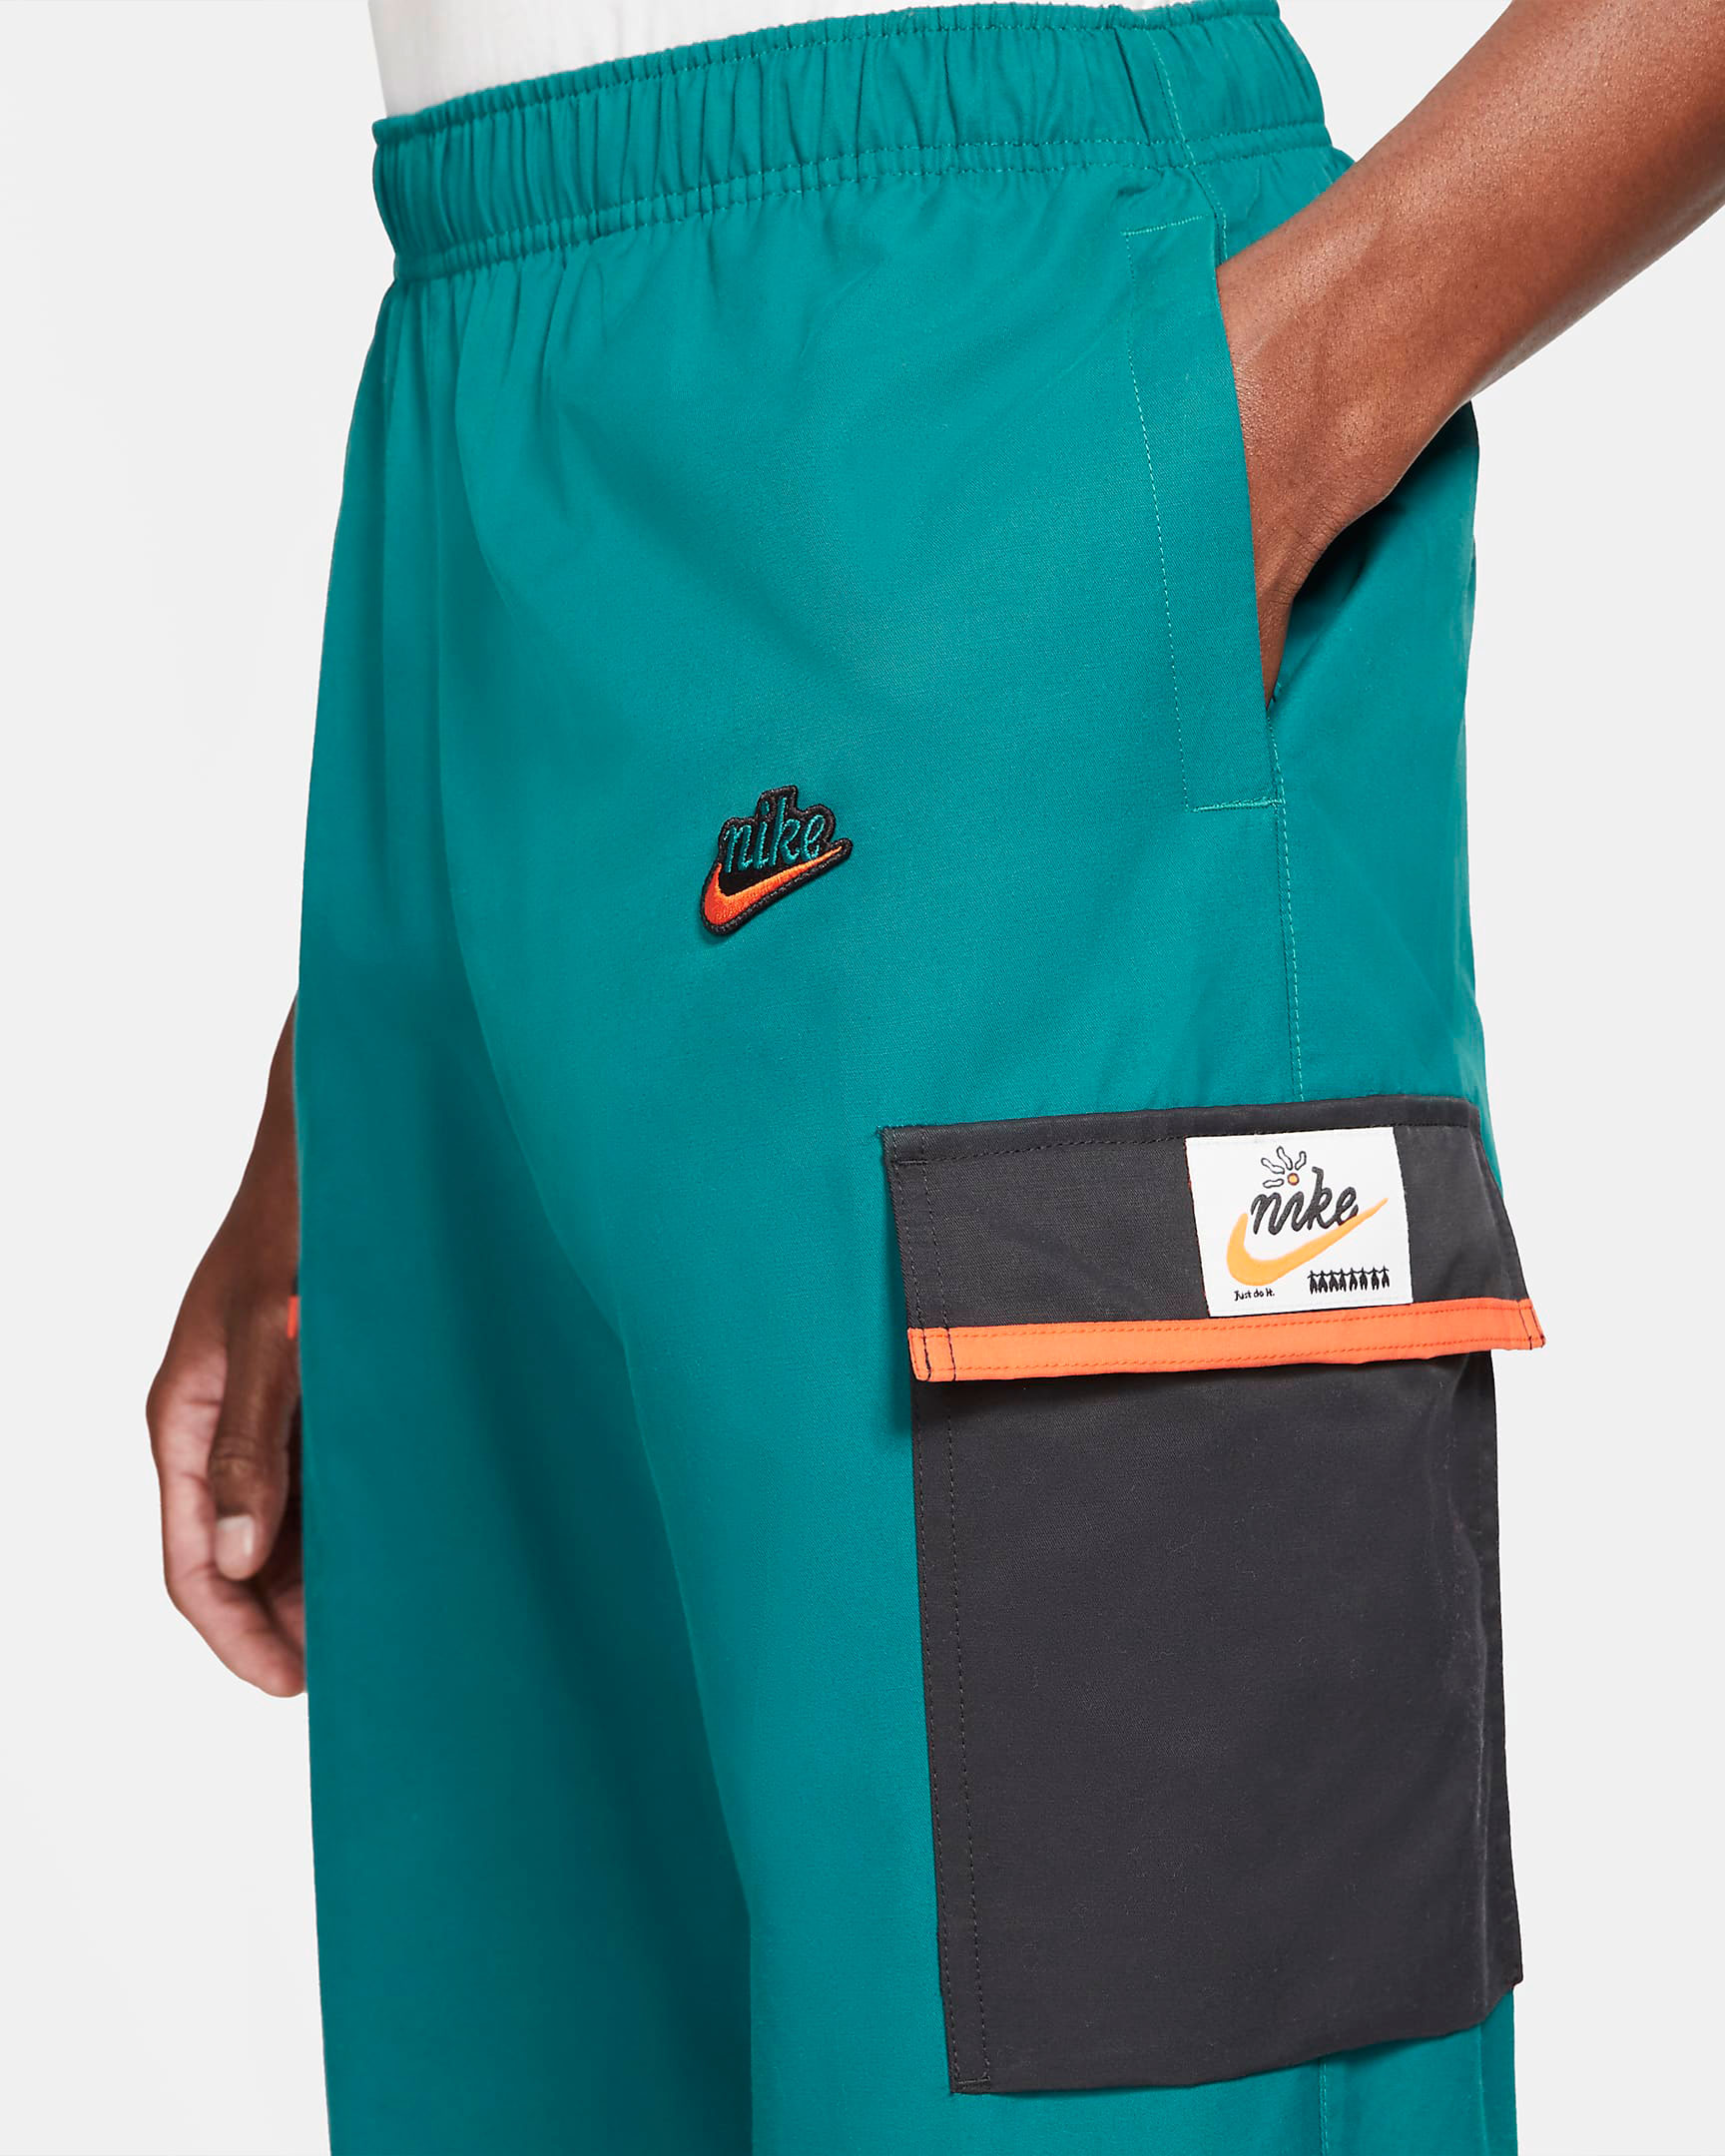 nike-air-griffey-max-1-freshwater-2021-pants-match-2